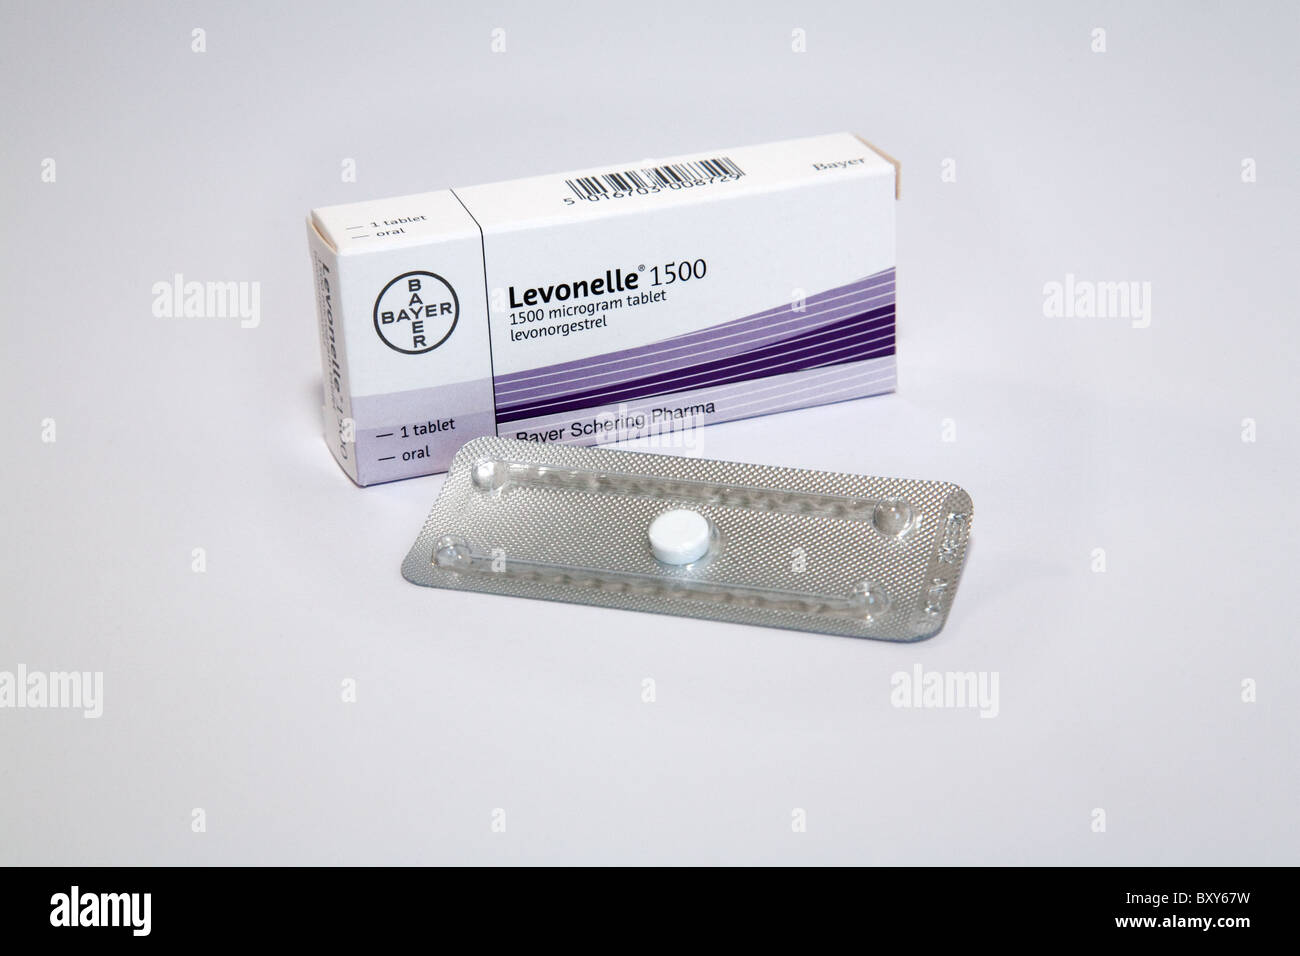 Levonelle Morning after pill for postcoital female contraception, UK Stock Photo